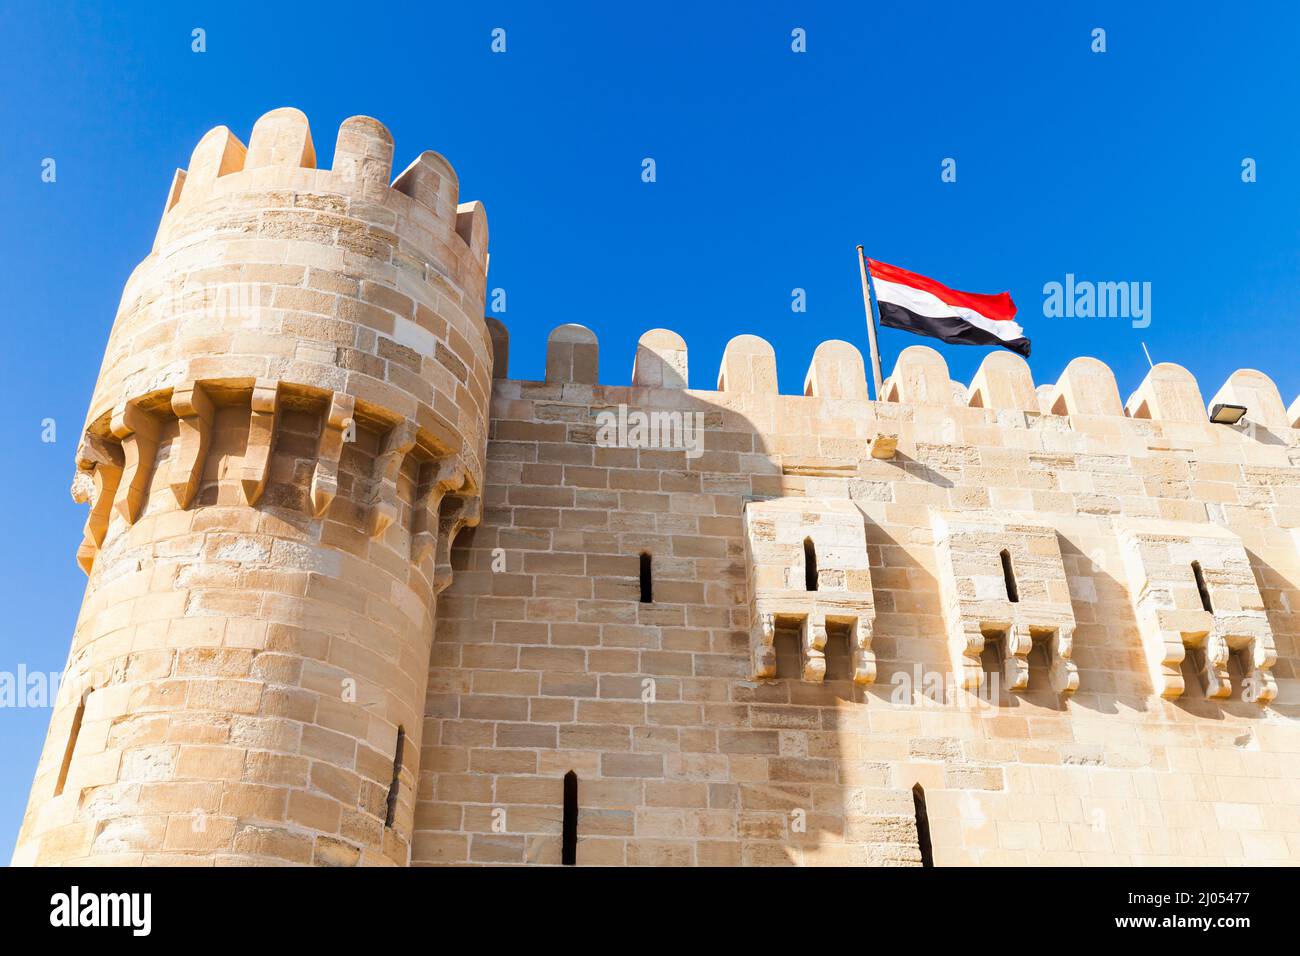 Alexandria, Egypt. Facade of the Citadel of Qaitbay or the Fort of Qaitbay, 15th-century defensive fortress located on the Mediterranean sea coast. It Stock Photo